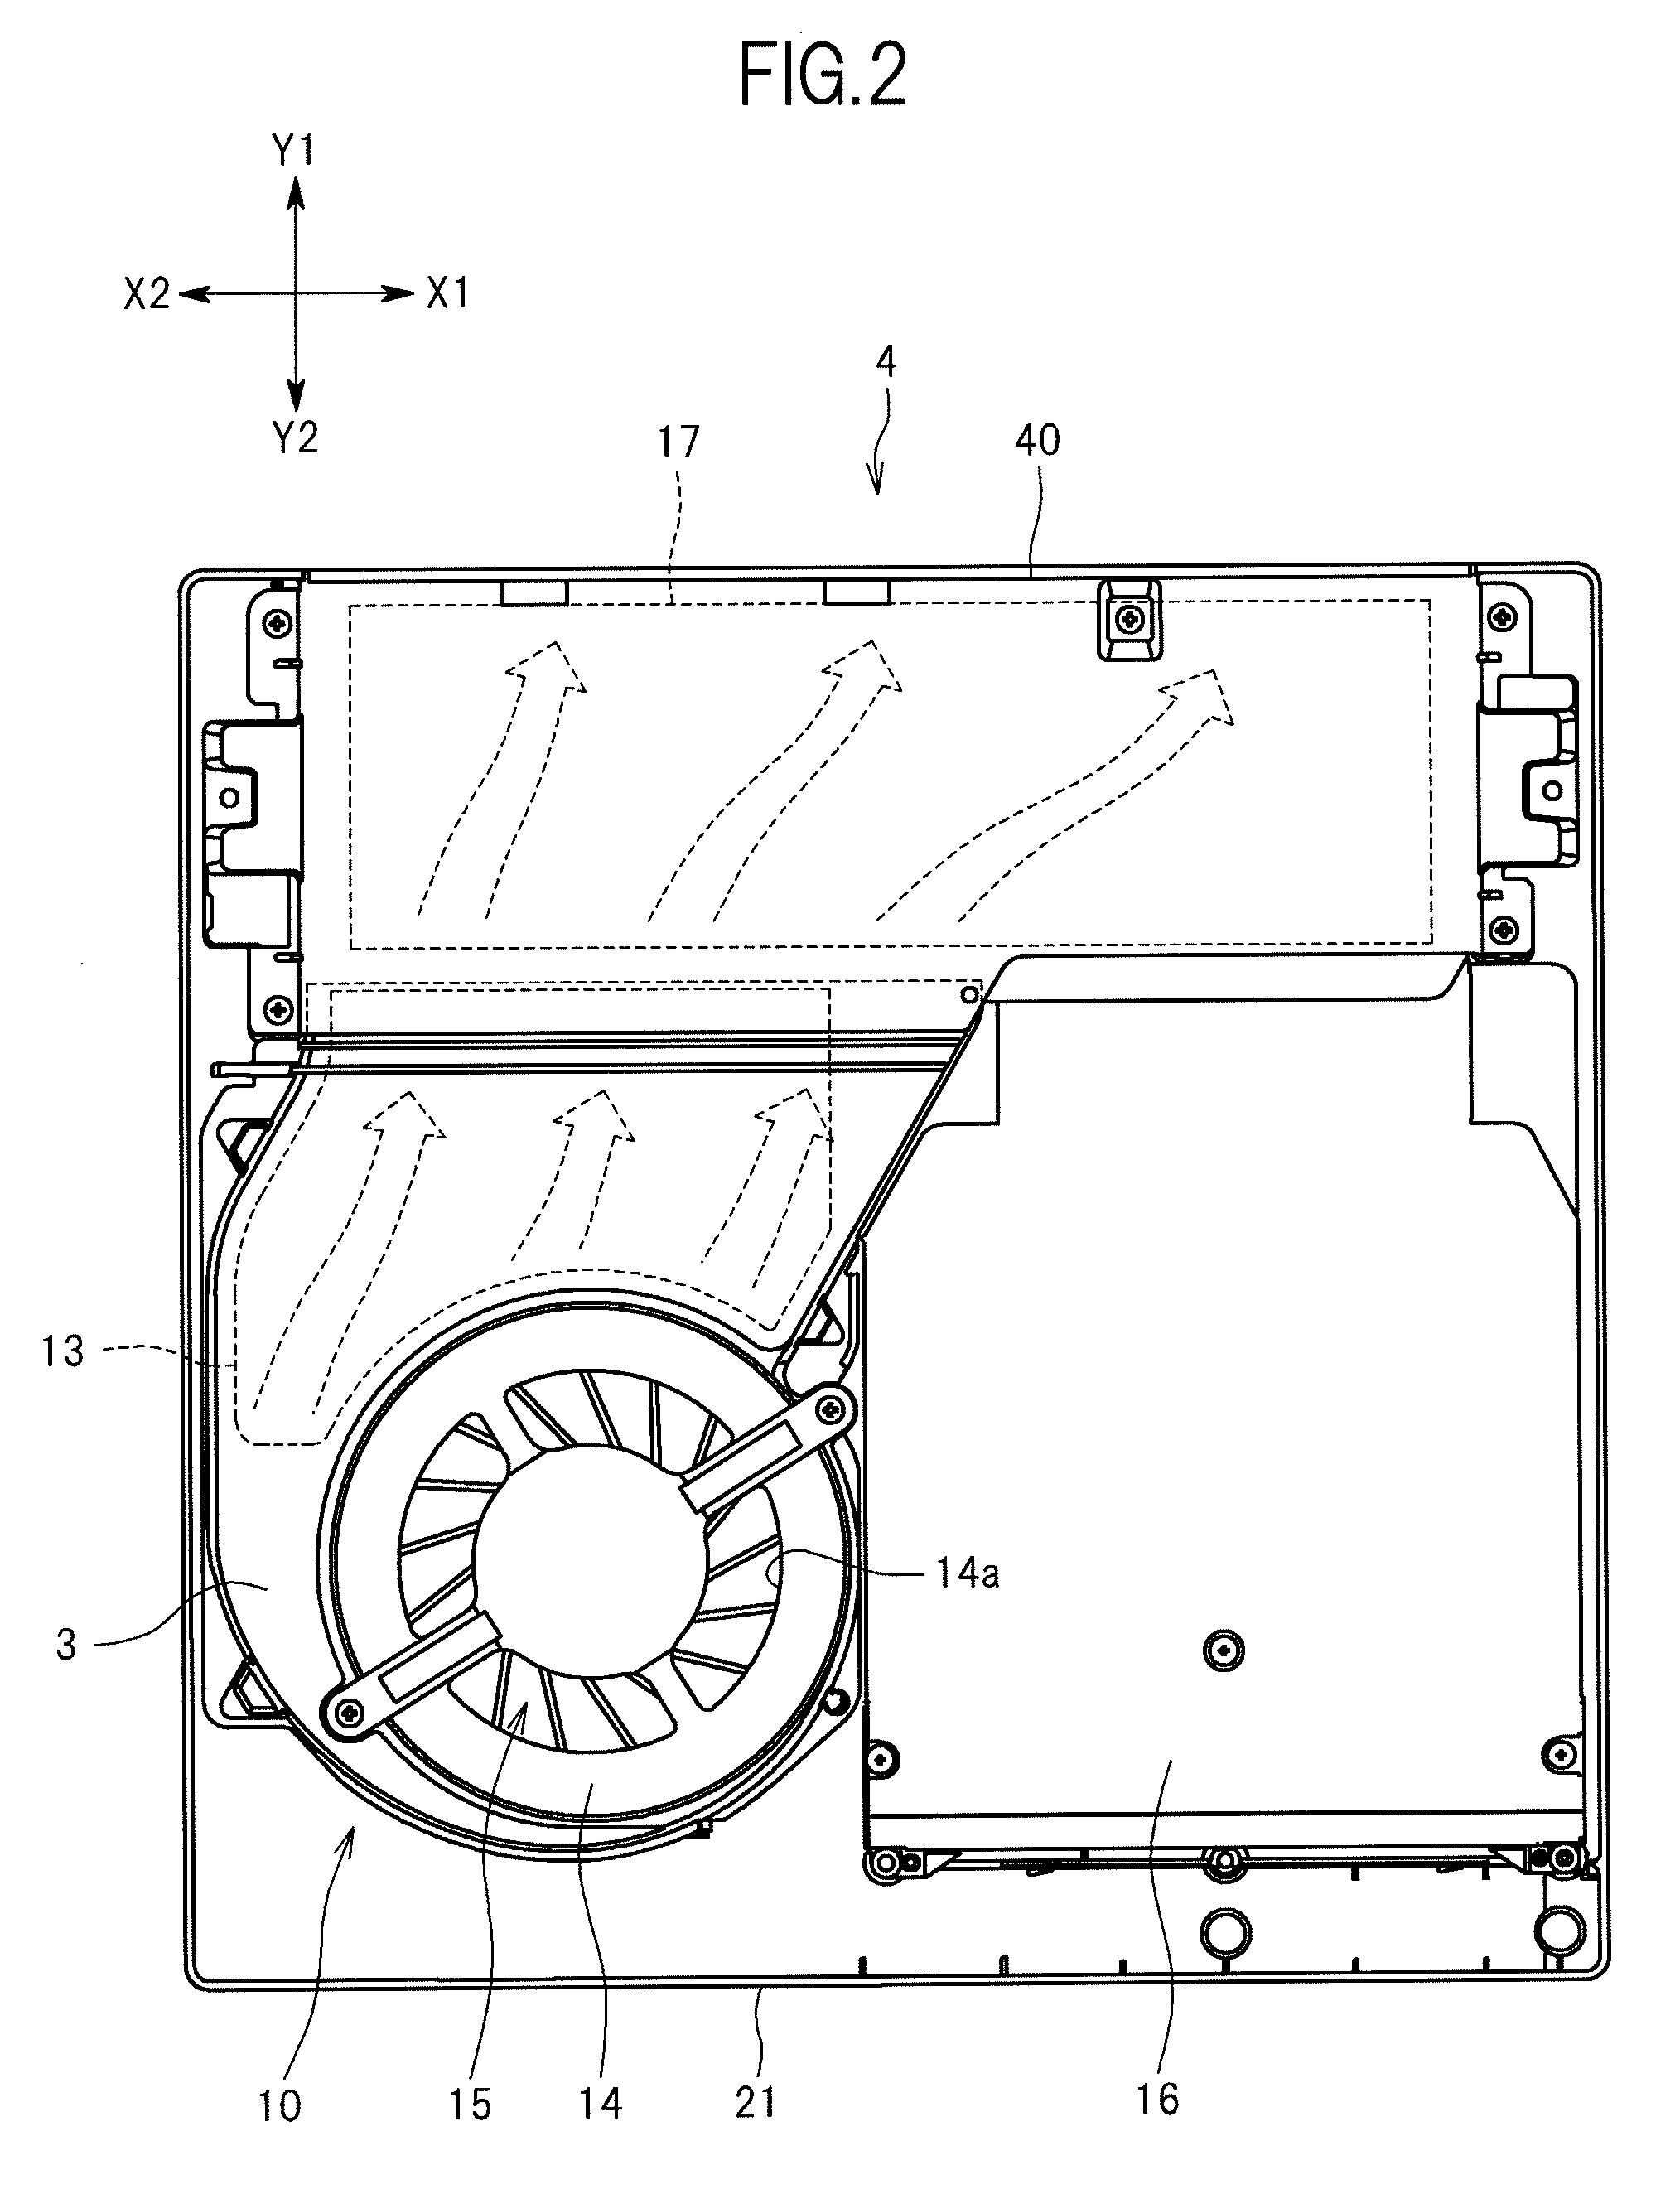 Electronic apparatus including a cooling unit and a wall member